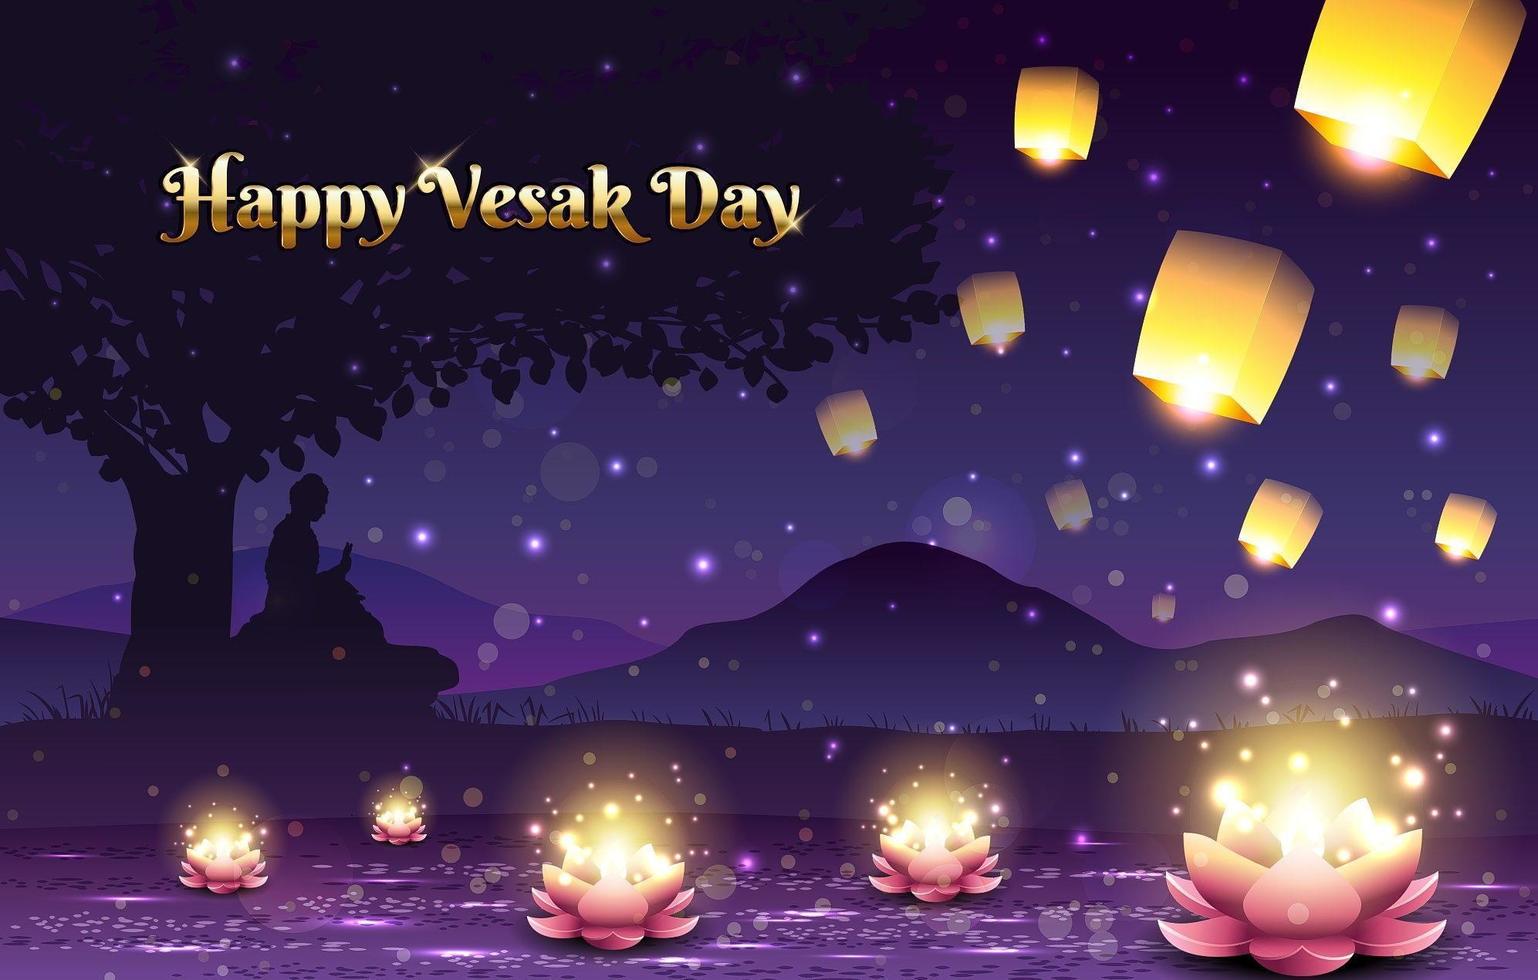 Vesak Day with Lotus Candle and Lanterns vector